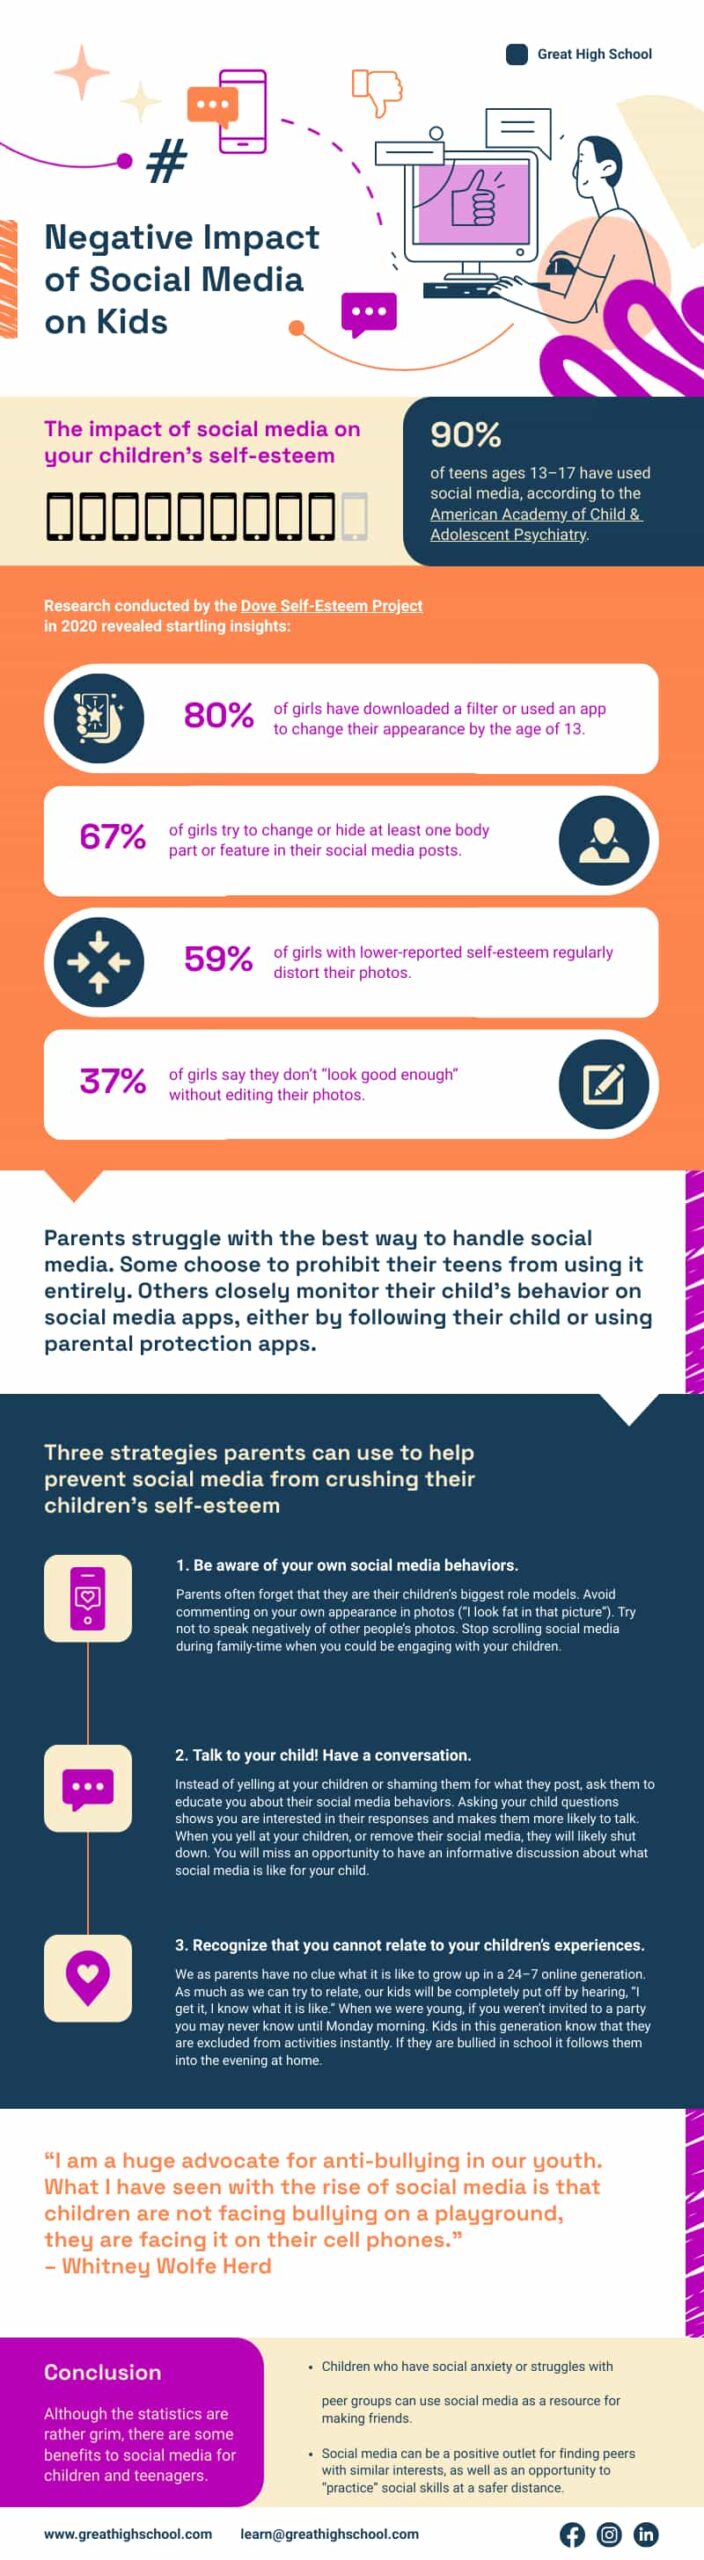 infographic example visualizing statistics and research findings - negative impact of social media on kids